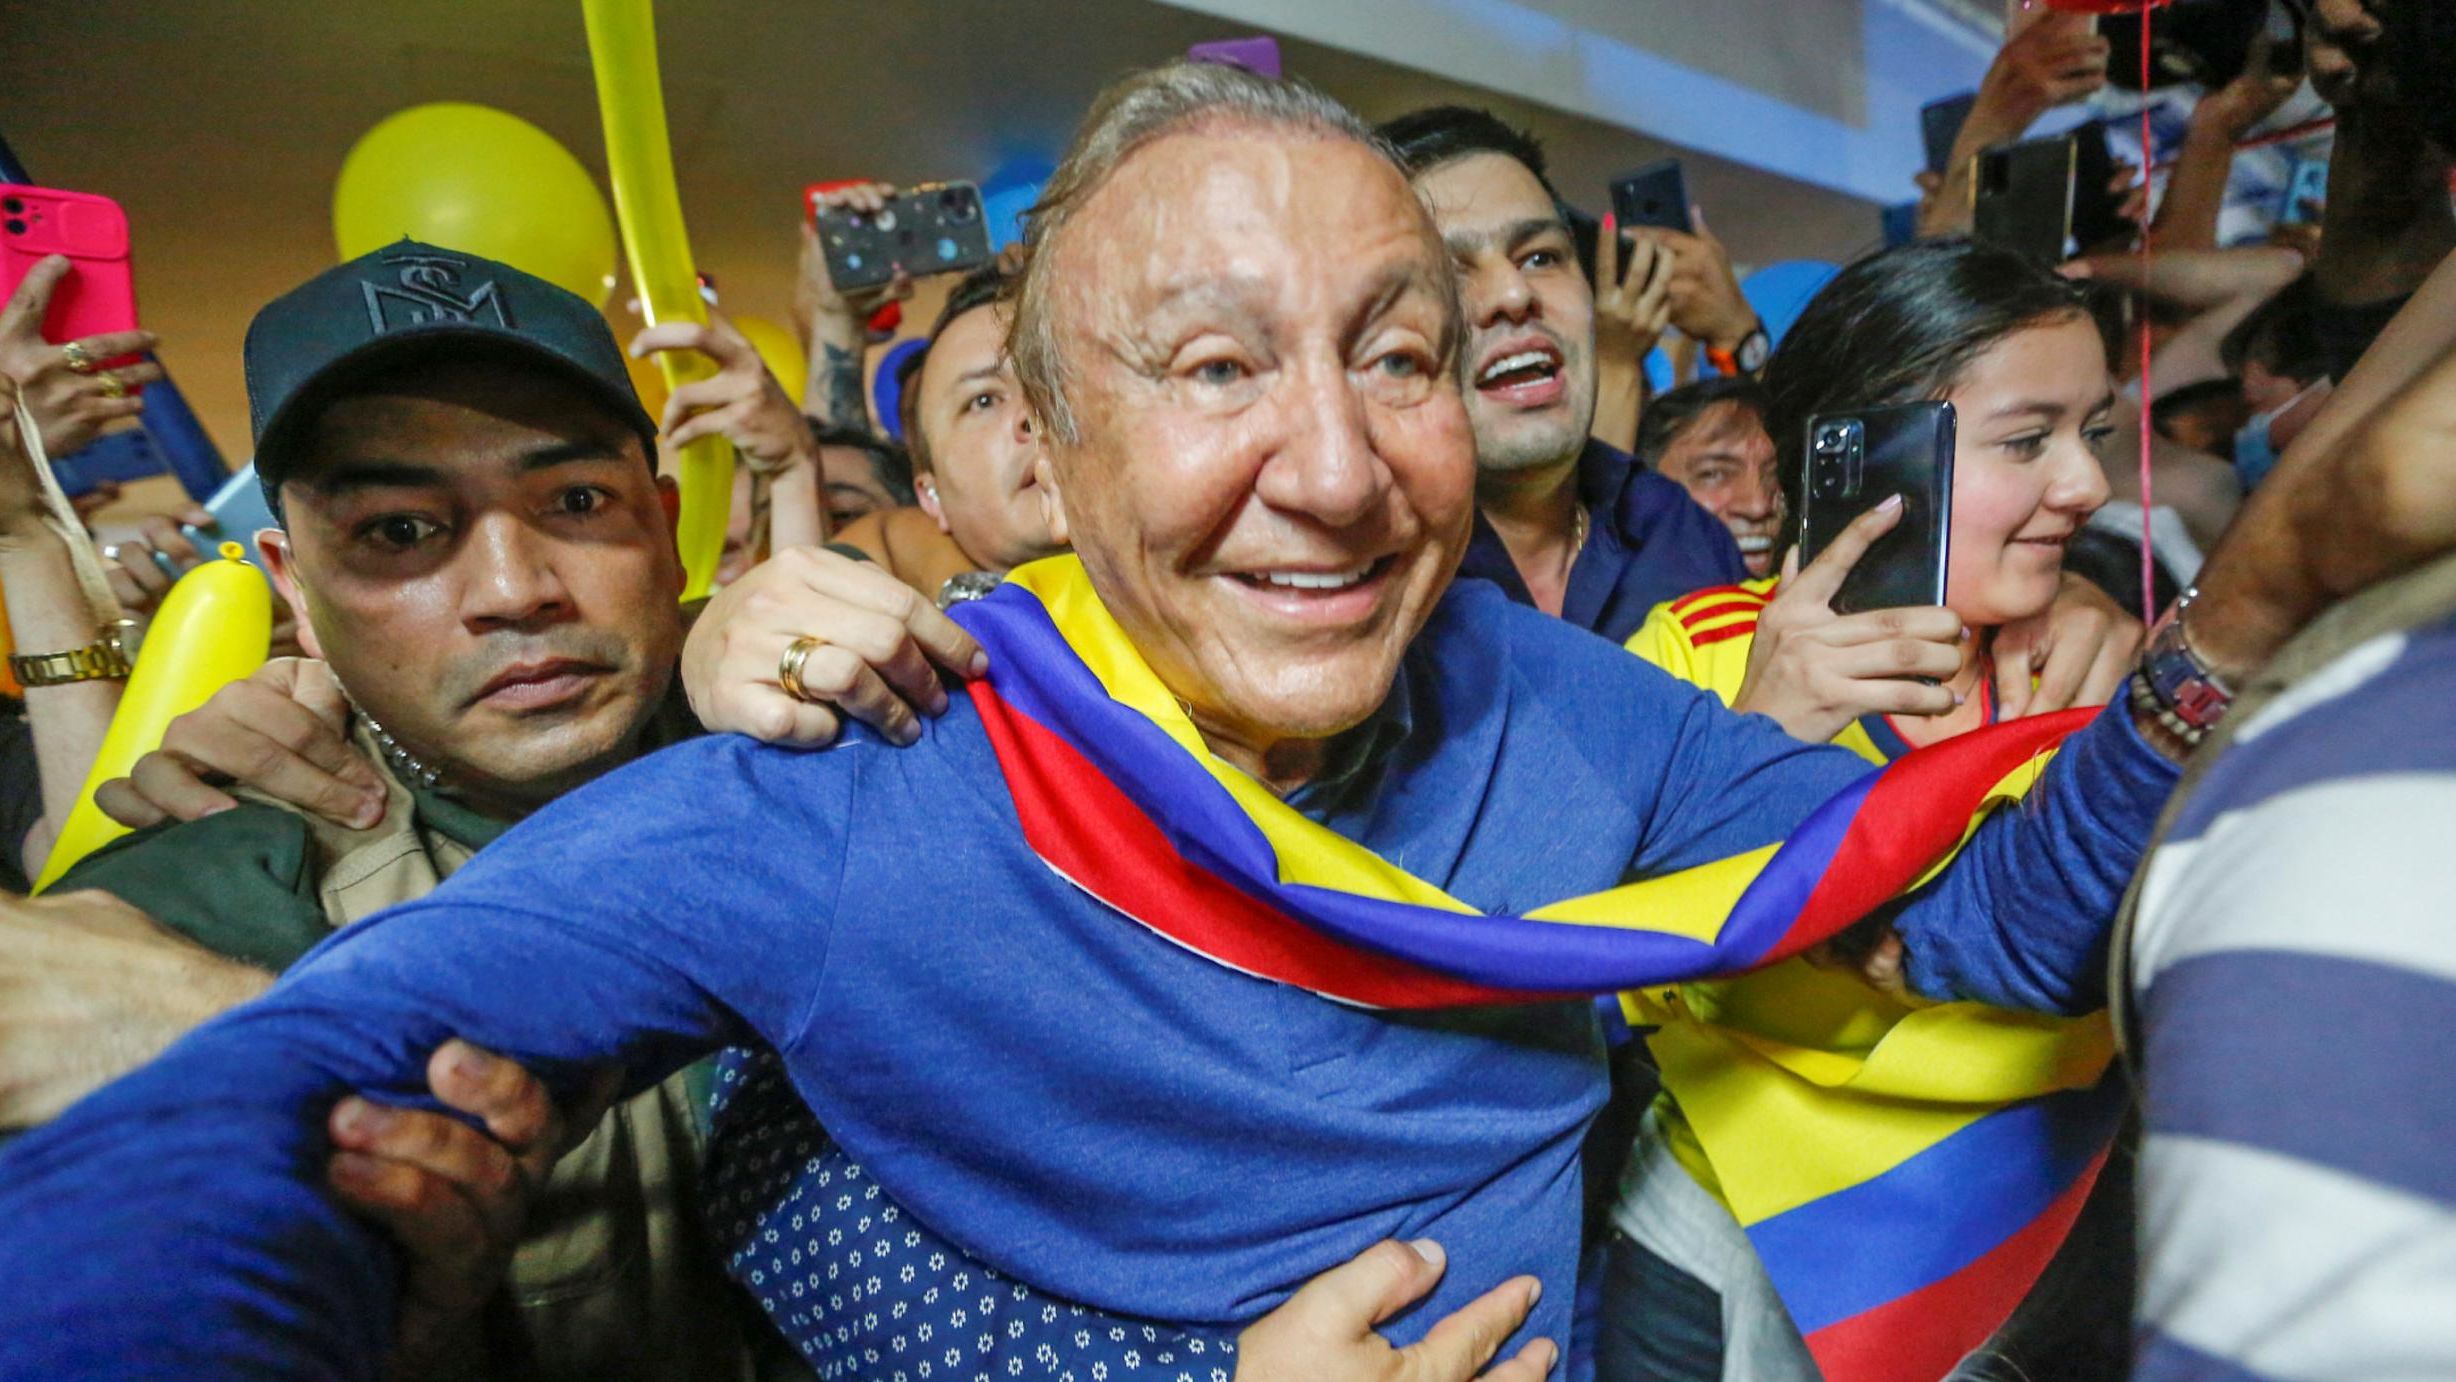 Rodolfo Hernandez greets supporters at the Palonegro International Airport in Bucaramanga, Colombia on May 21. 